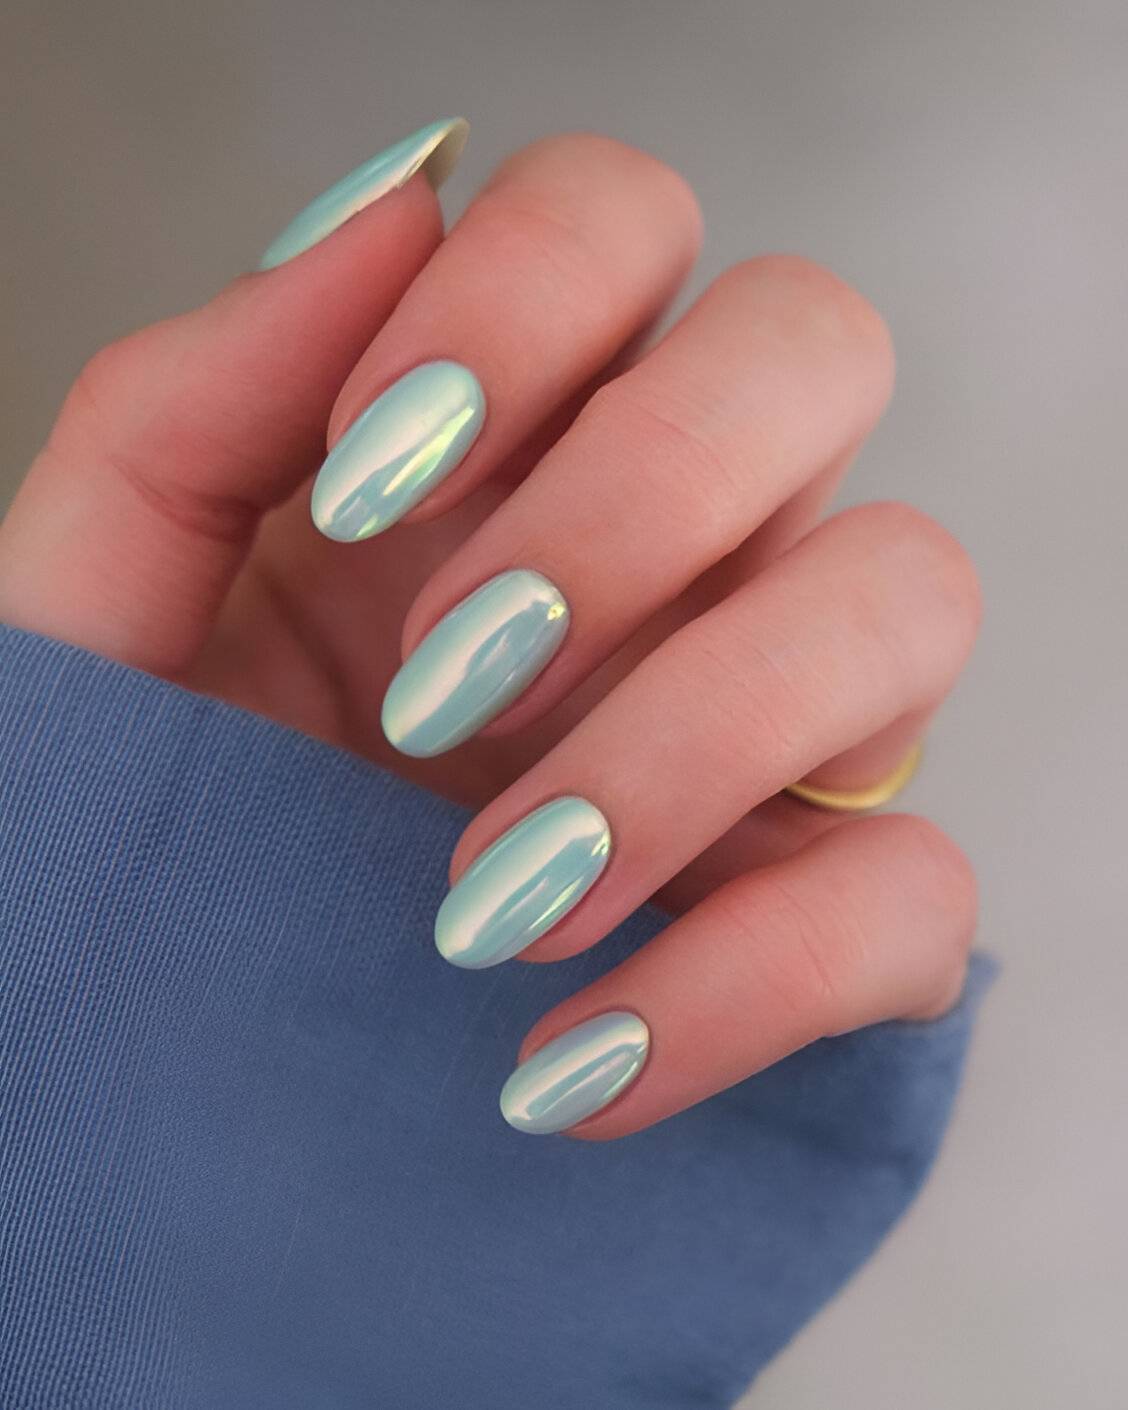 30 Chic Chrome Nail Designs For The Ultimate Glam Look - 201